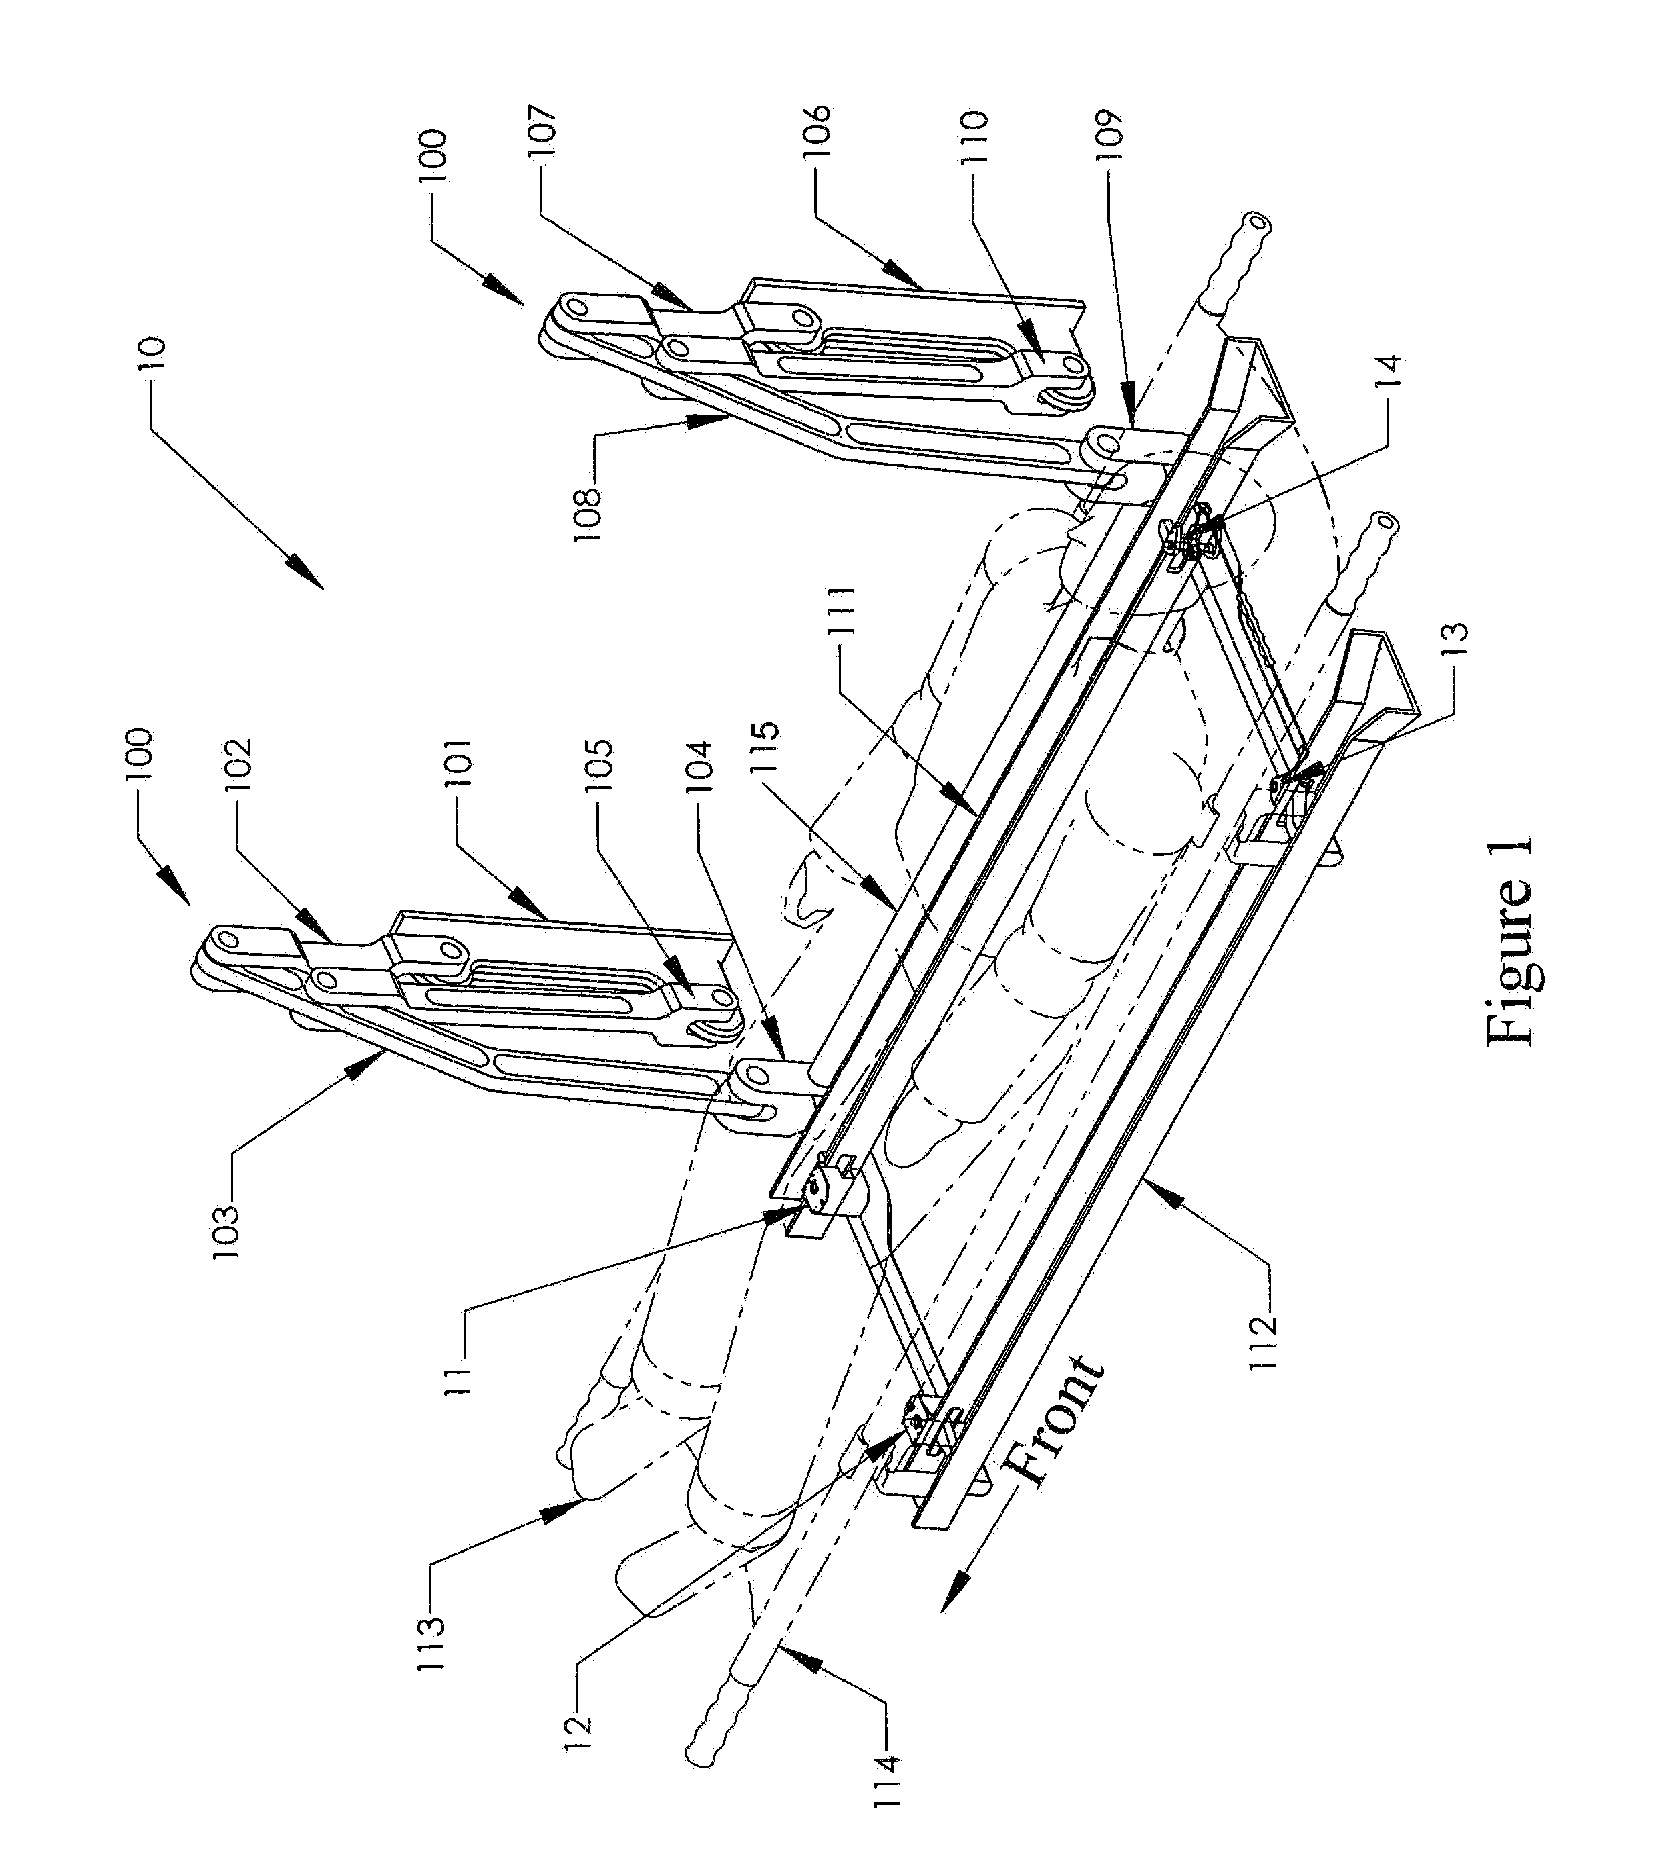 Patient support system for medical transport vehicles